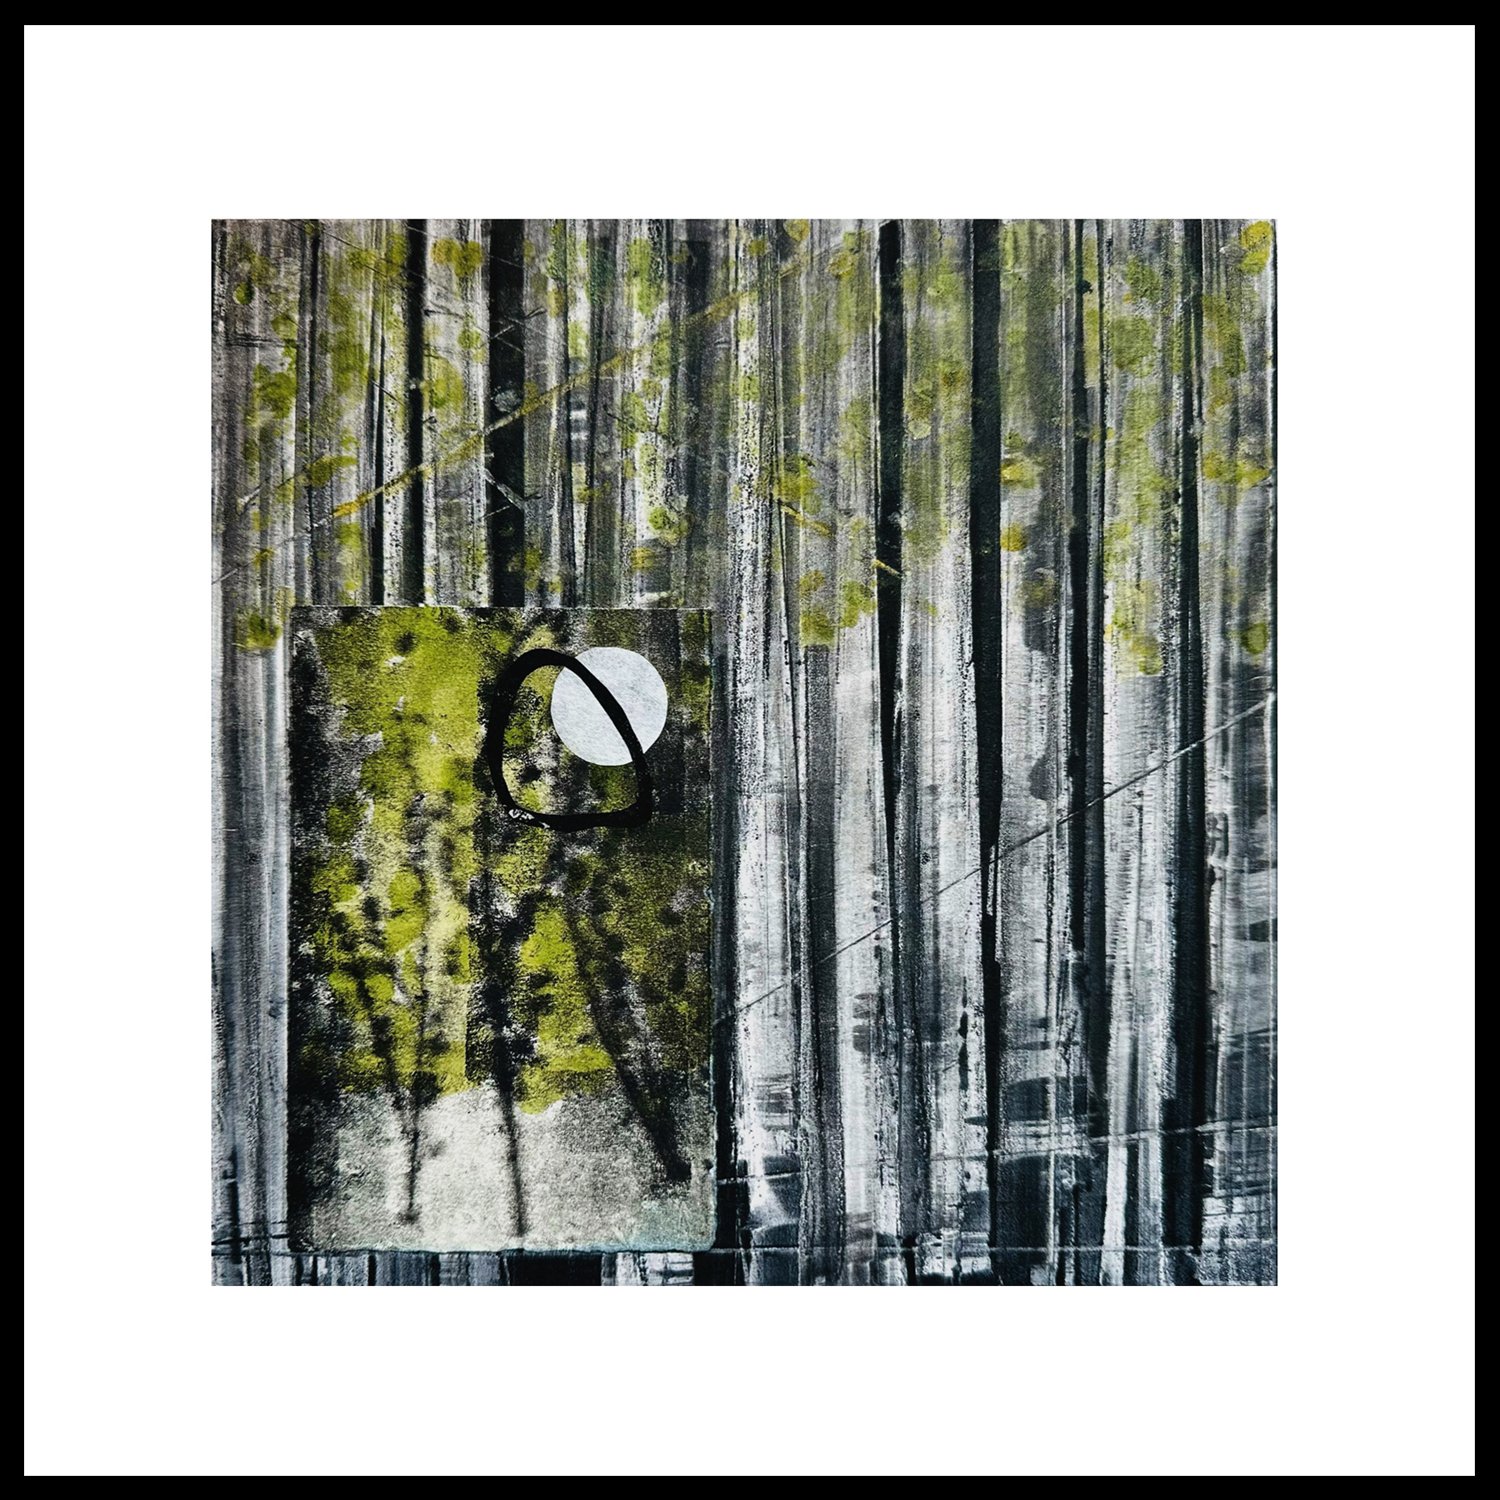    The Forest Through the Trees   “Trees are poems that the earth writes upon the sky.”— Kahlil Gibran  Mixed media monotype, custom mat and gray metal frame, 16.25 x 16.25,” 1/1   $379 - SOLD  